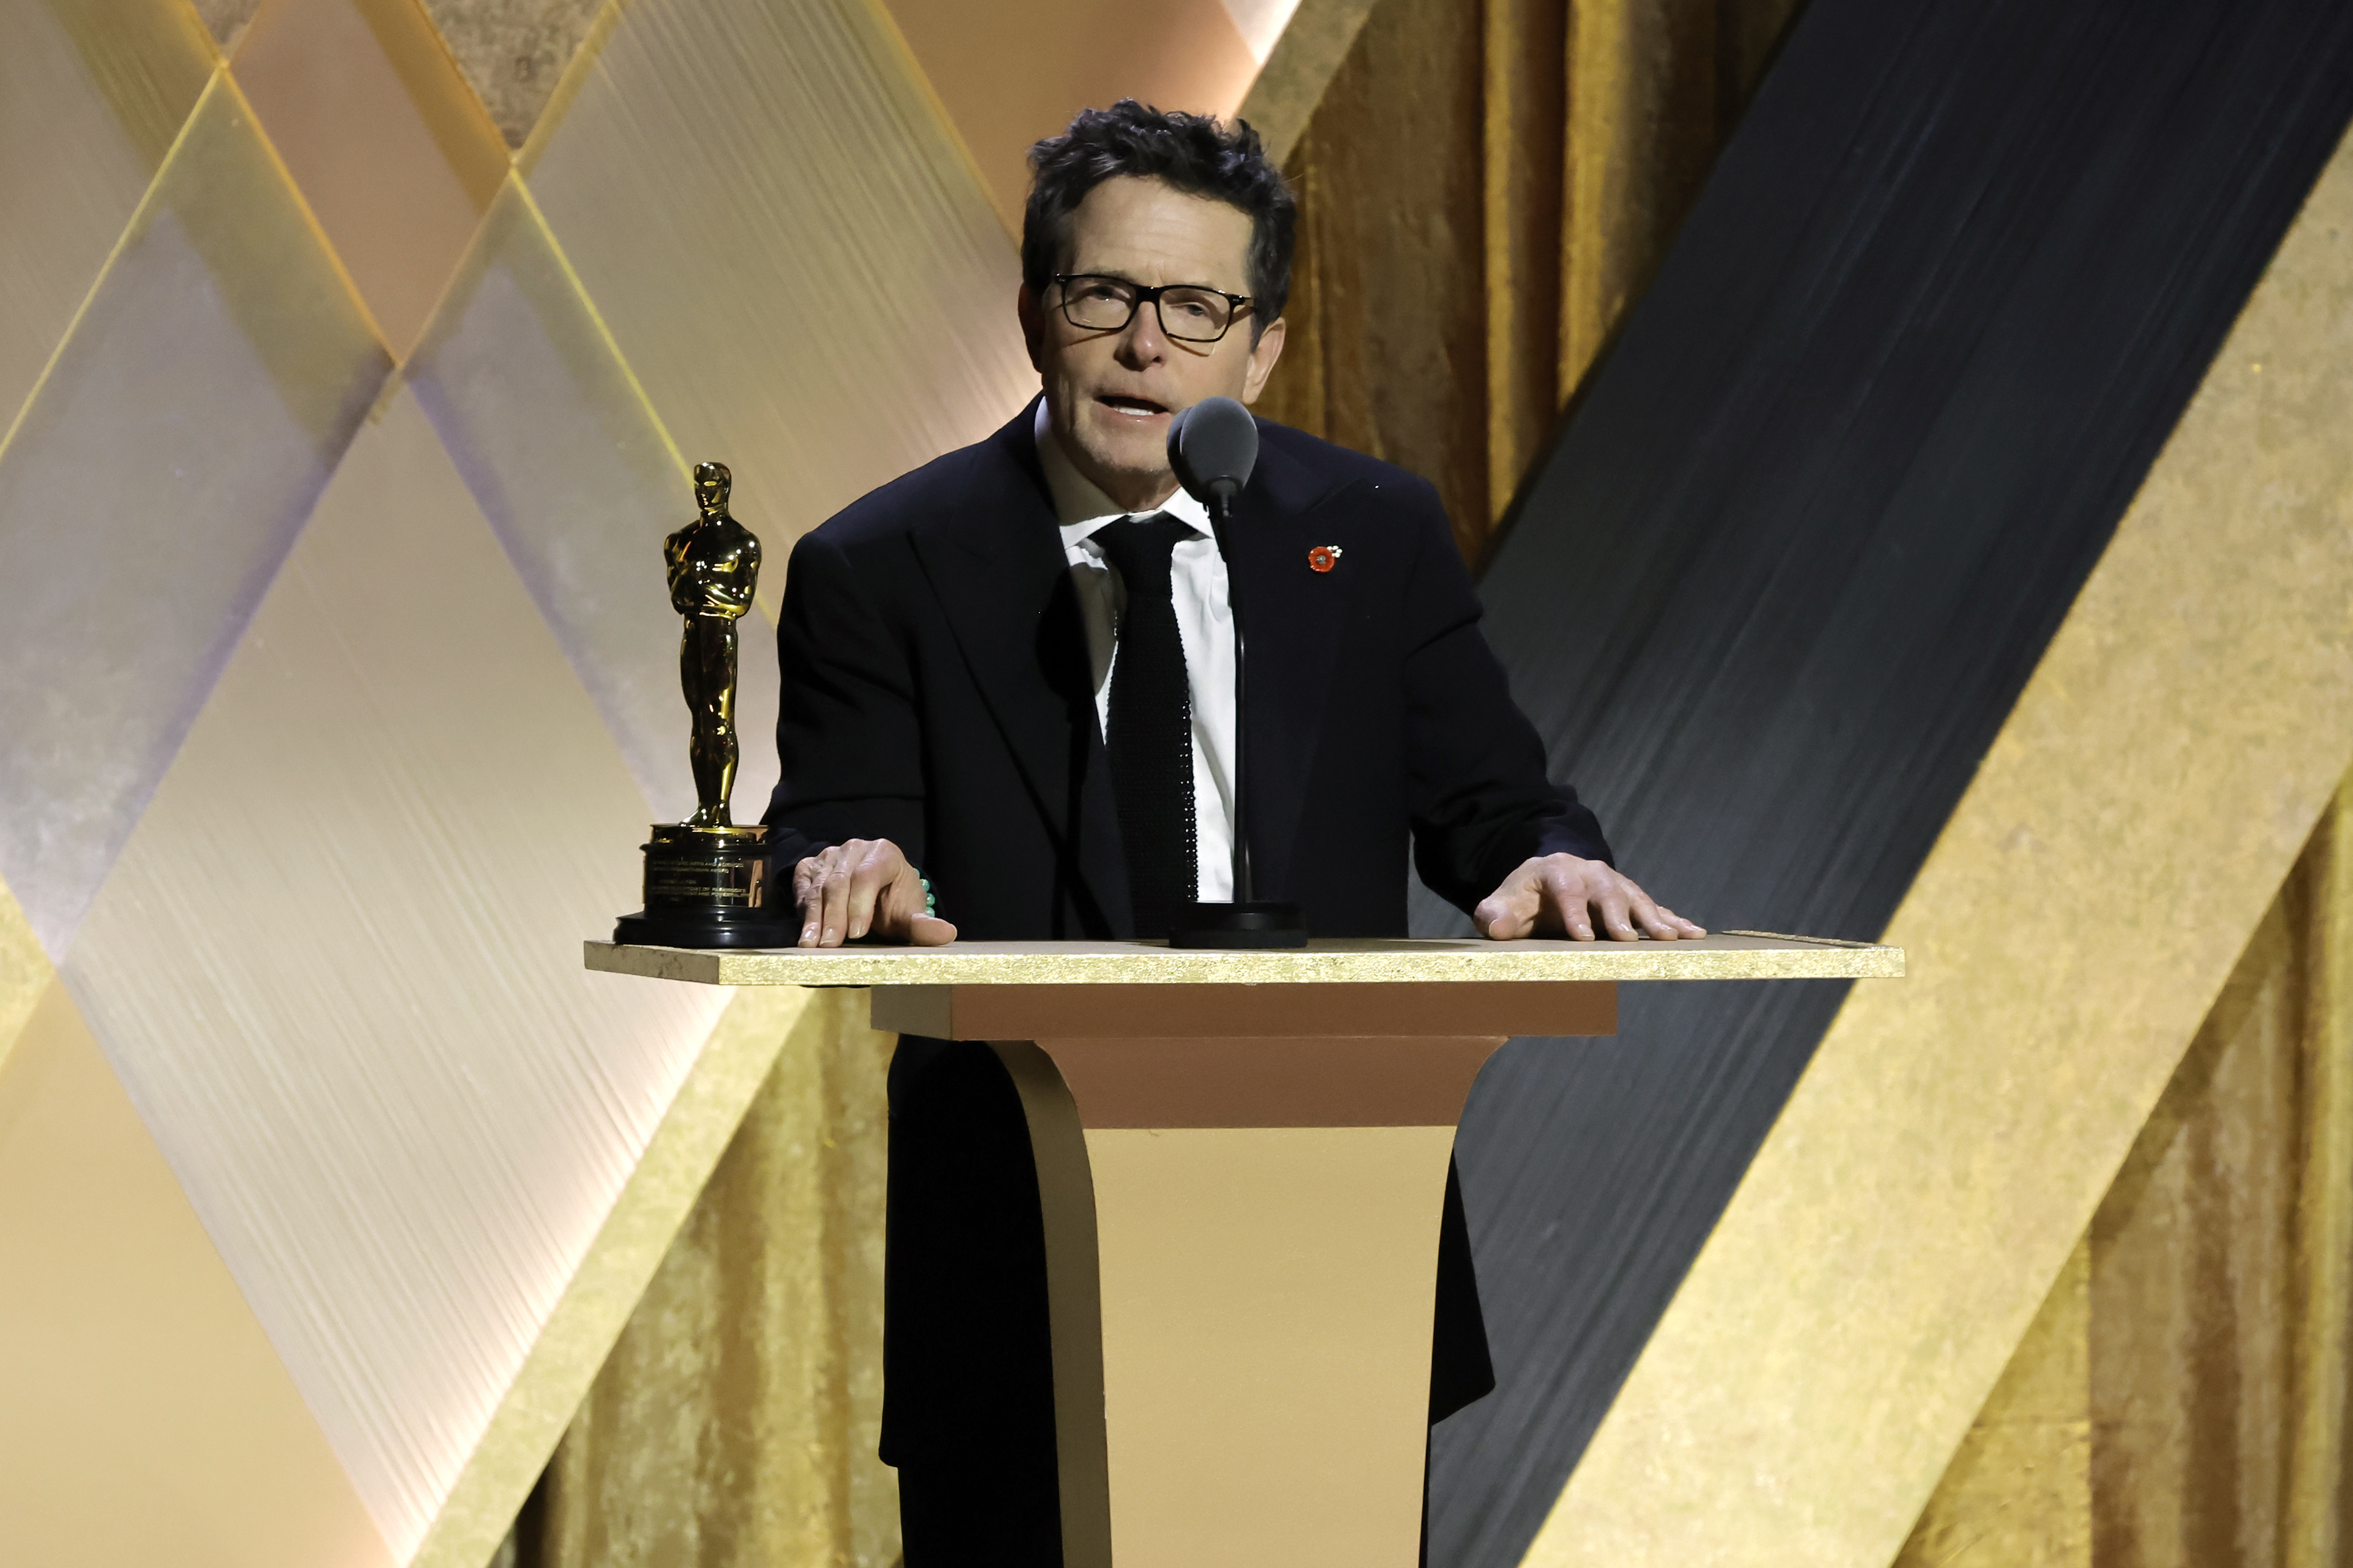 Michael J. Fox accepts the Jean Hersholt Humanitarian Award during the Academy of Motion Picture Arts and Sciences 13th Governors Awards at Fairmont Century Plaza on November 19, 2022 in Los Angeles, California.